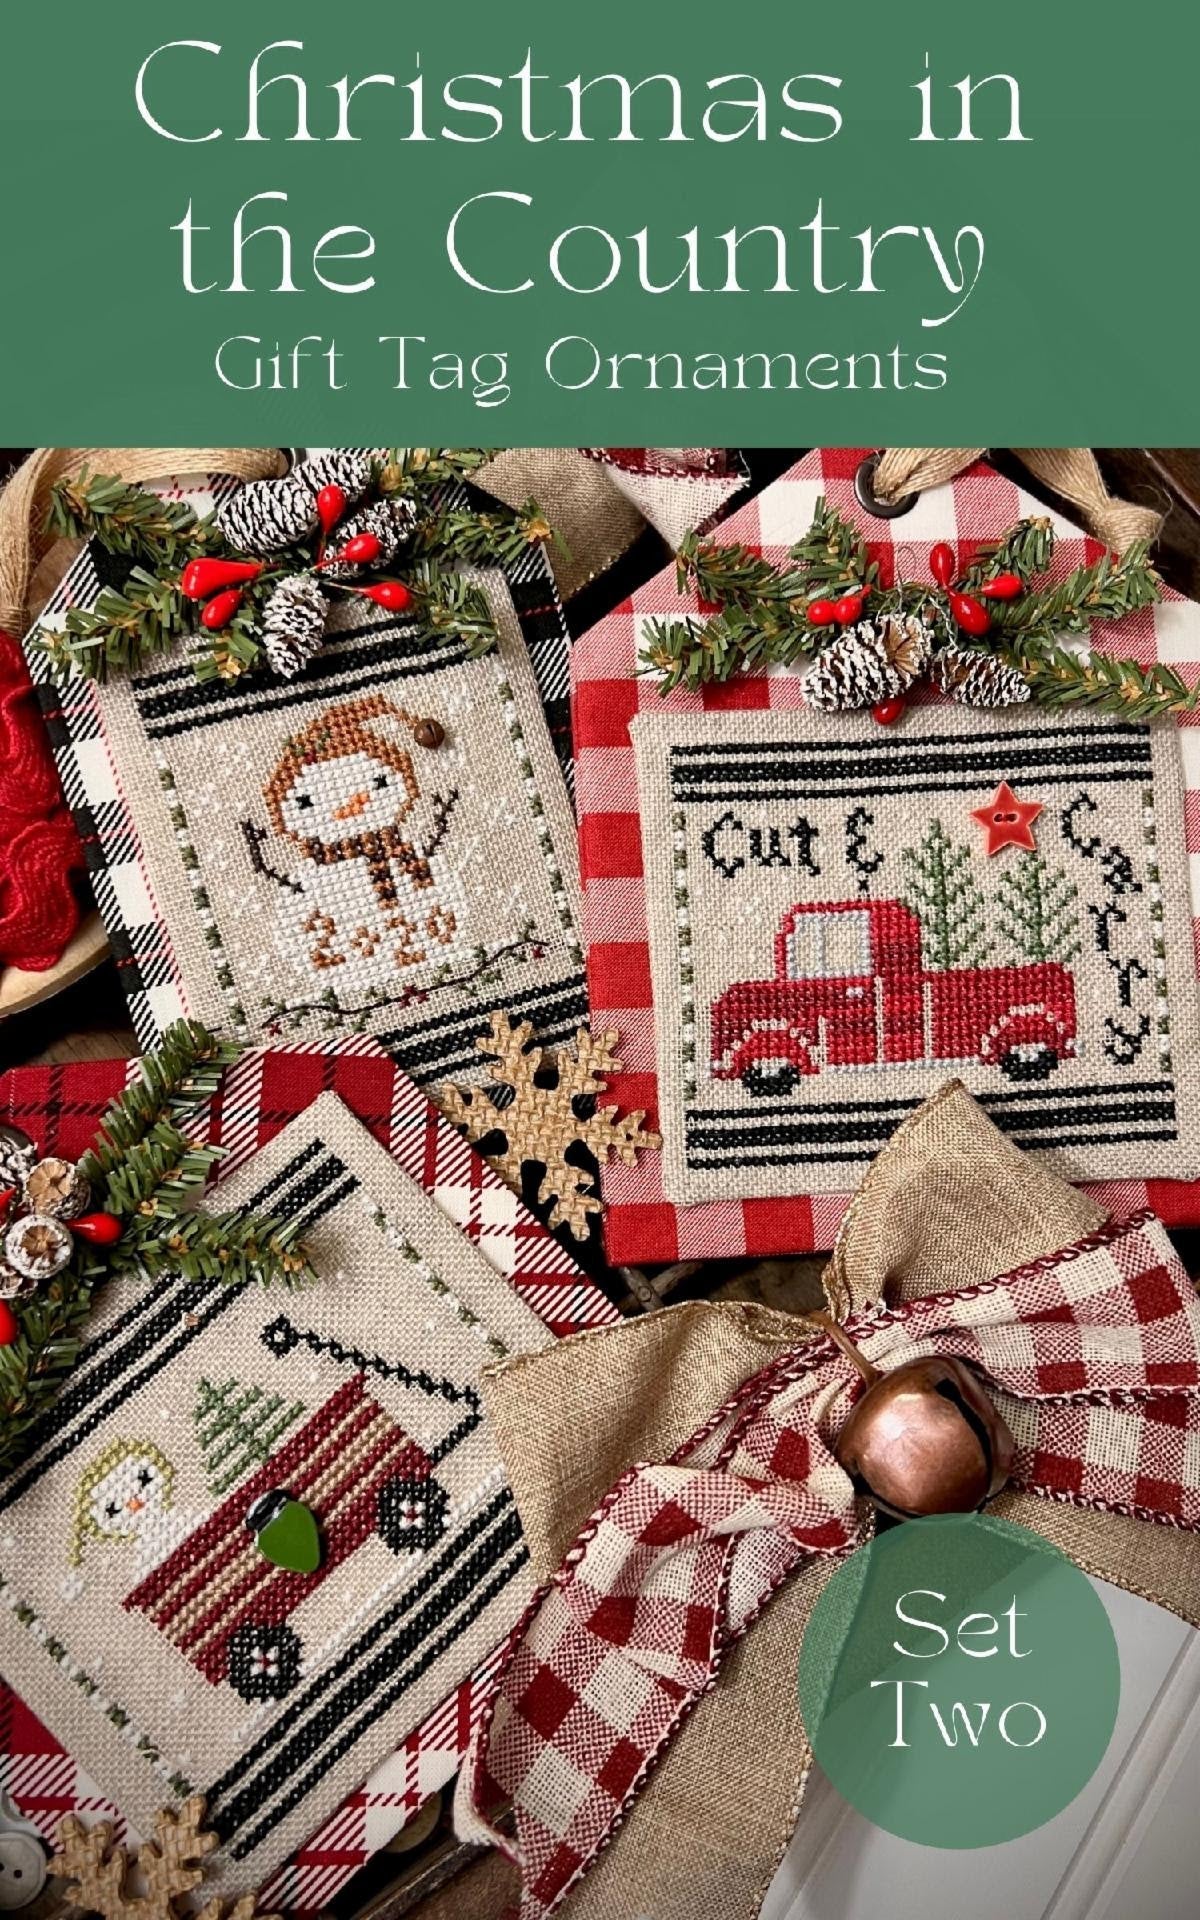 ABFA - Christmas In The Country: Gift Tag Ornaments 02